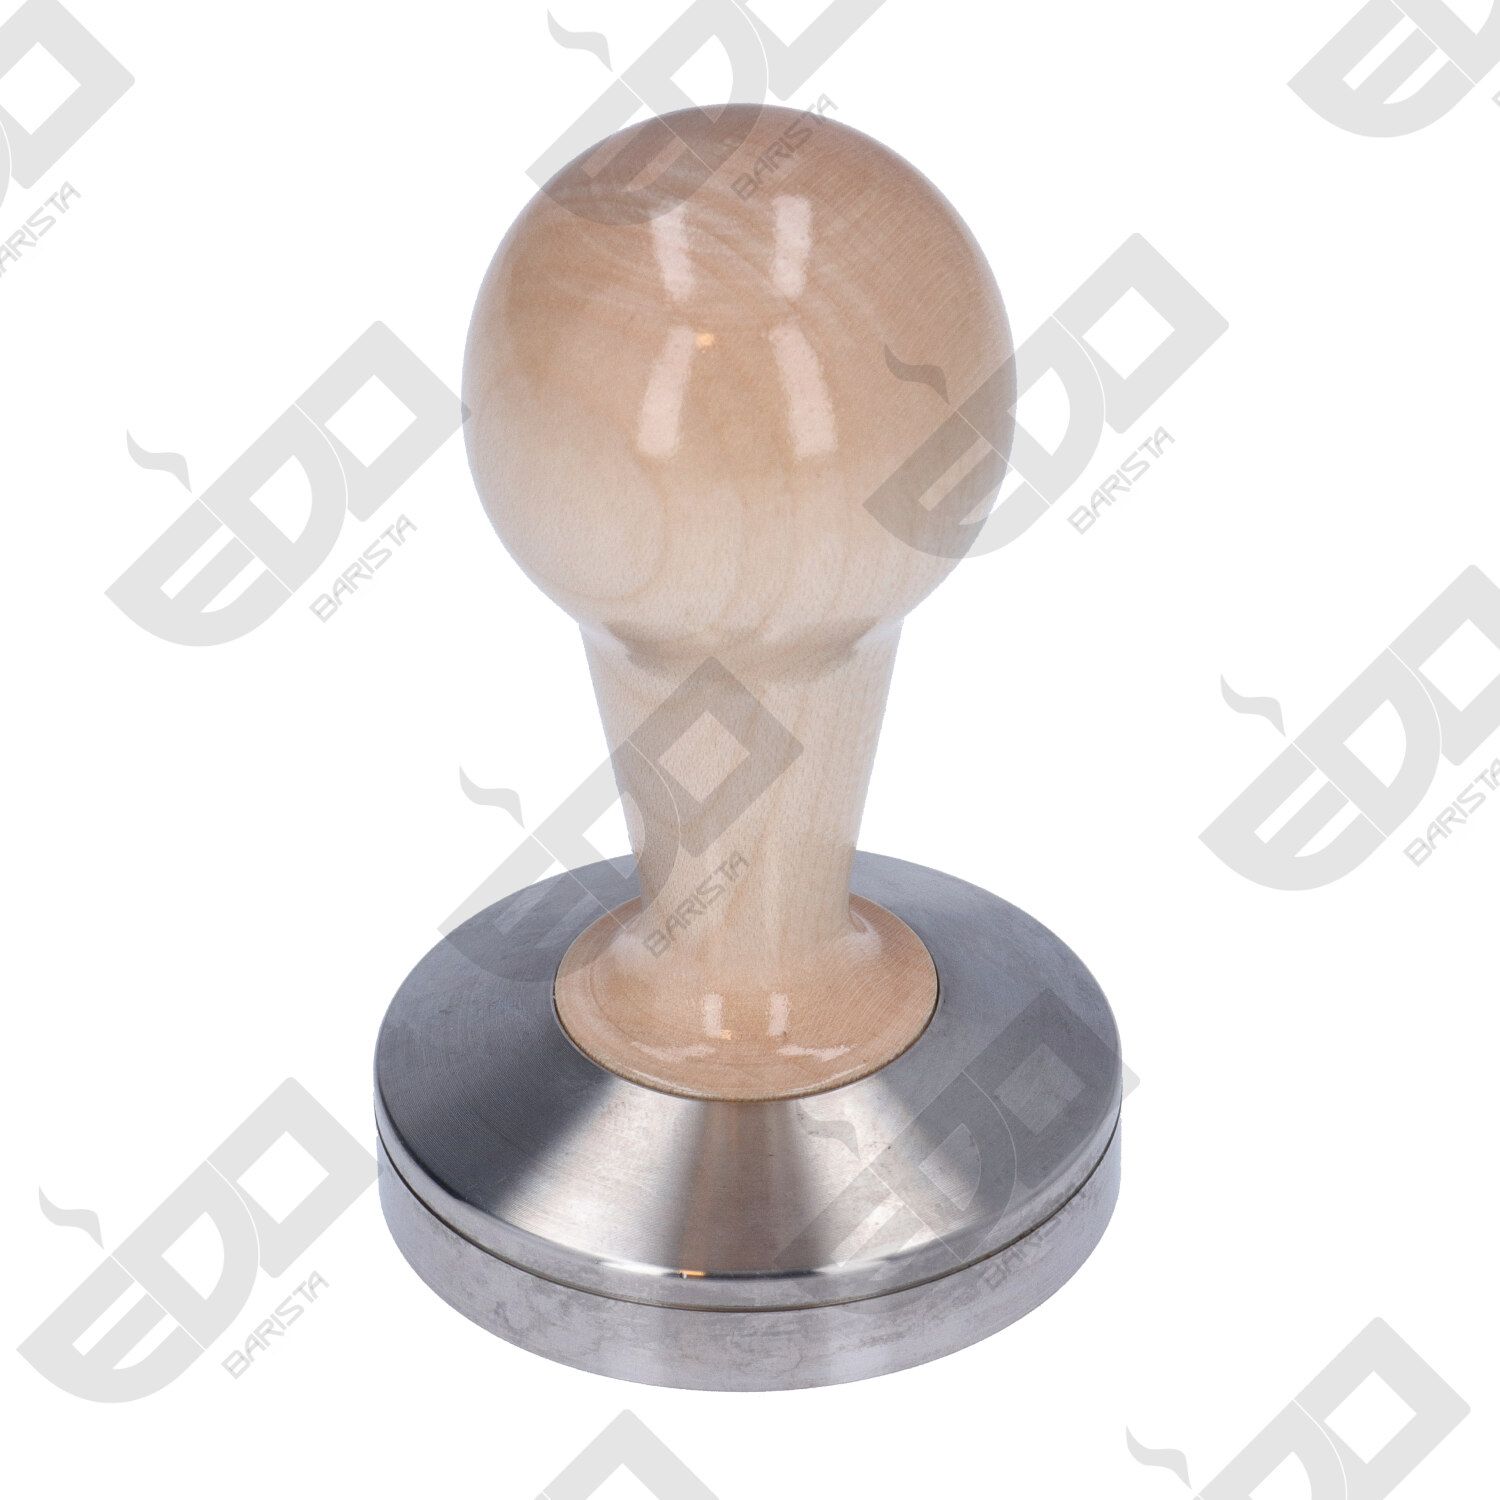 COMPETIZIONE' TAMPER IN MAPLE WOOD AND STAINLESS STEEL - 58,5mm